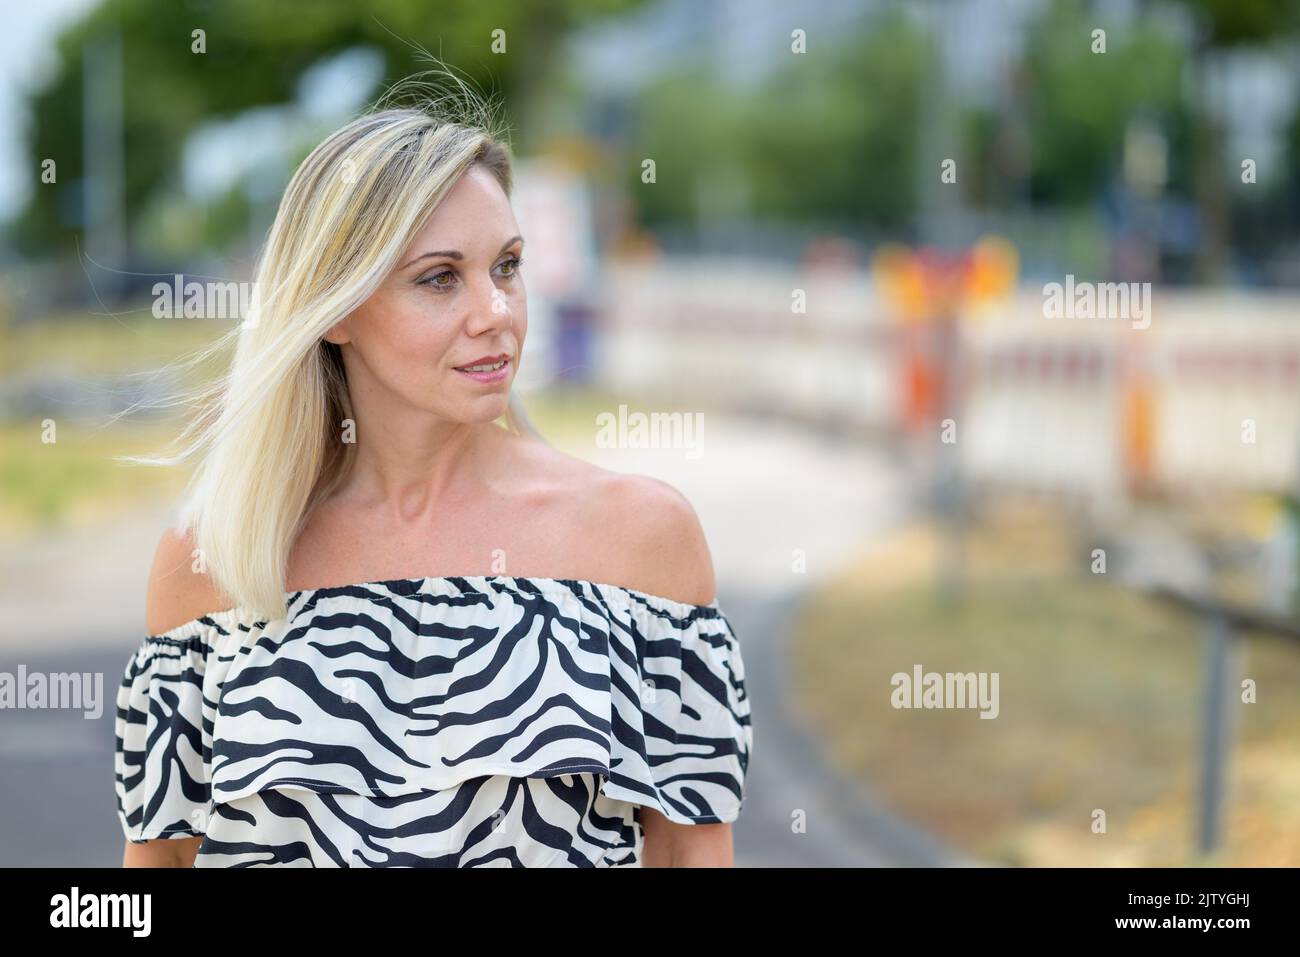 Woman walking down a quiet urban street looking aside with a thoughtful expression in close up Stock Photo